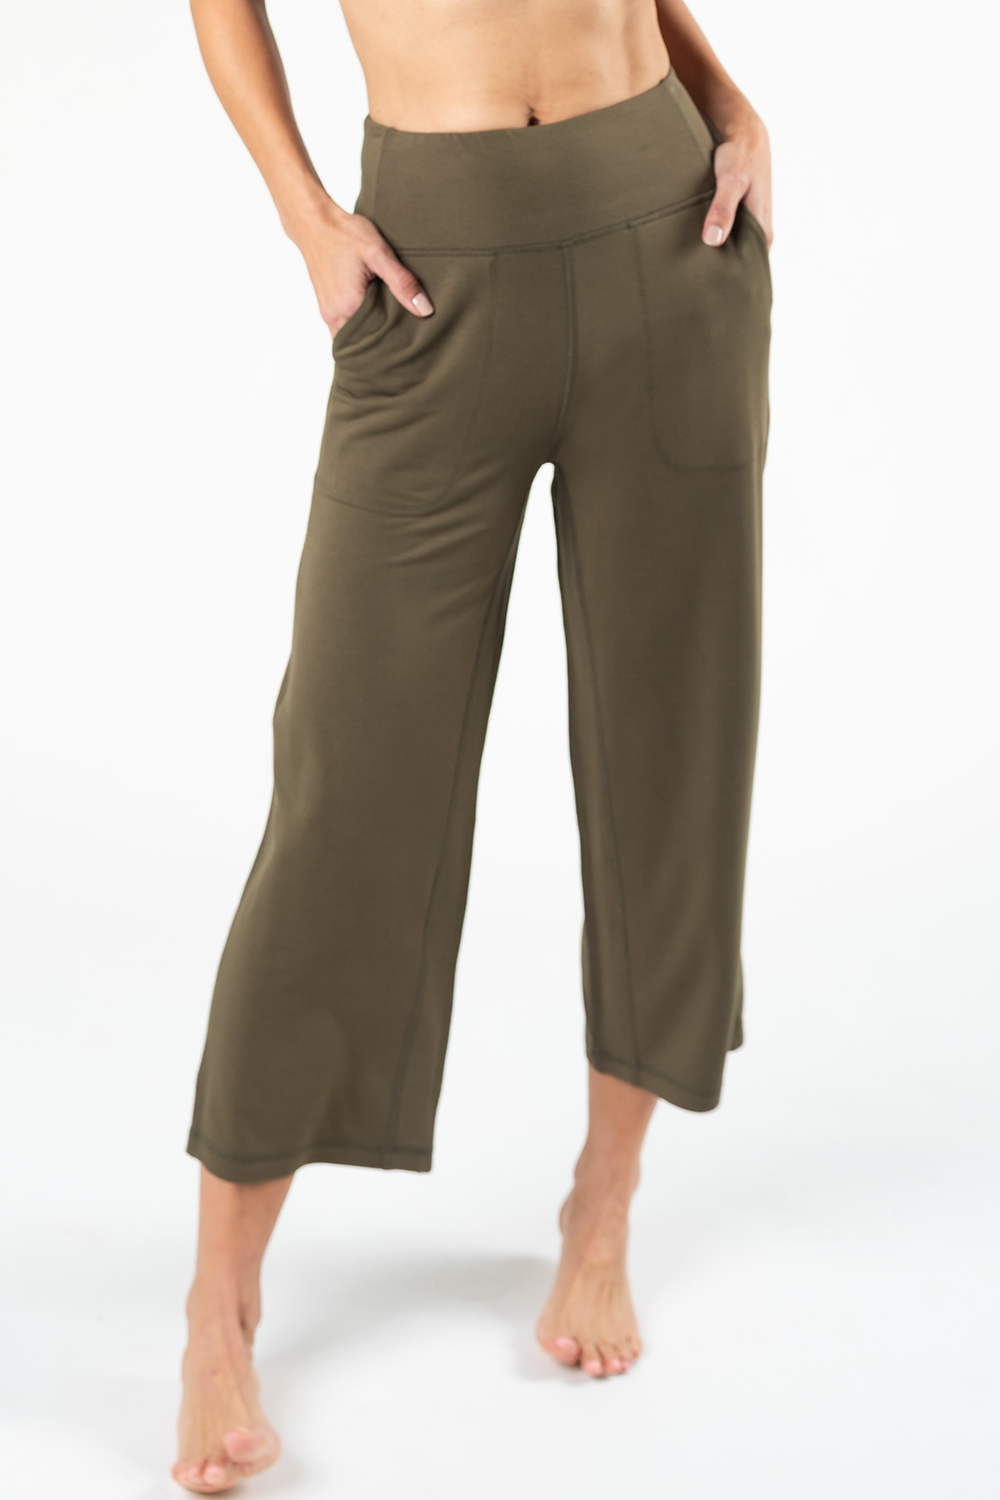 Buy deep-olive Terrera Dion Cropped Pant